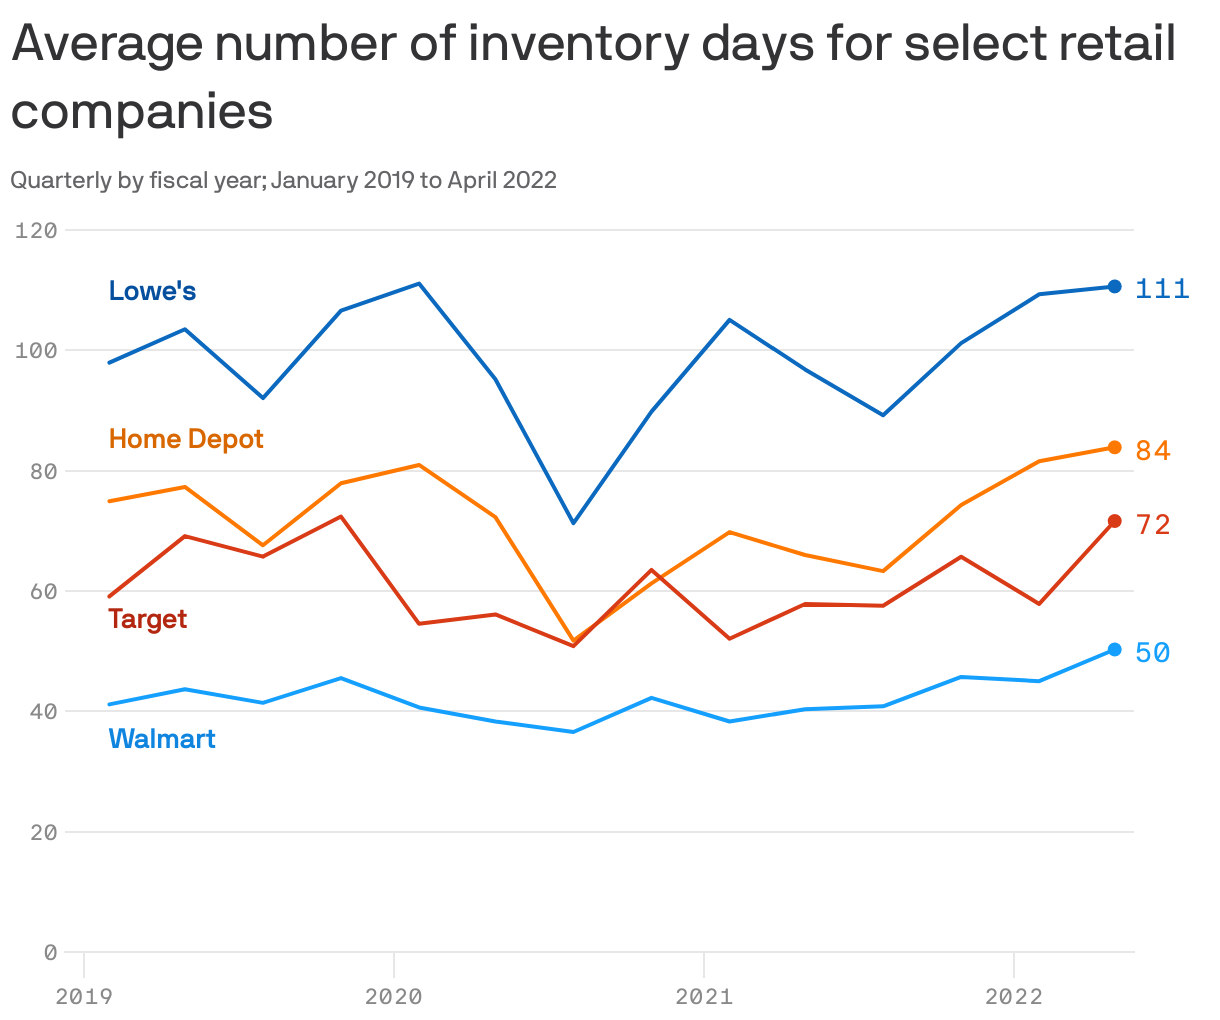 Average number of inventory days for select retail companies